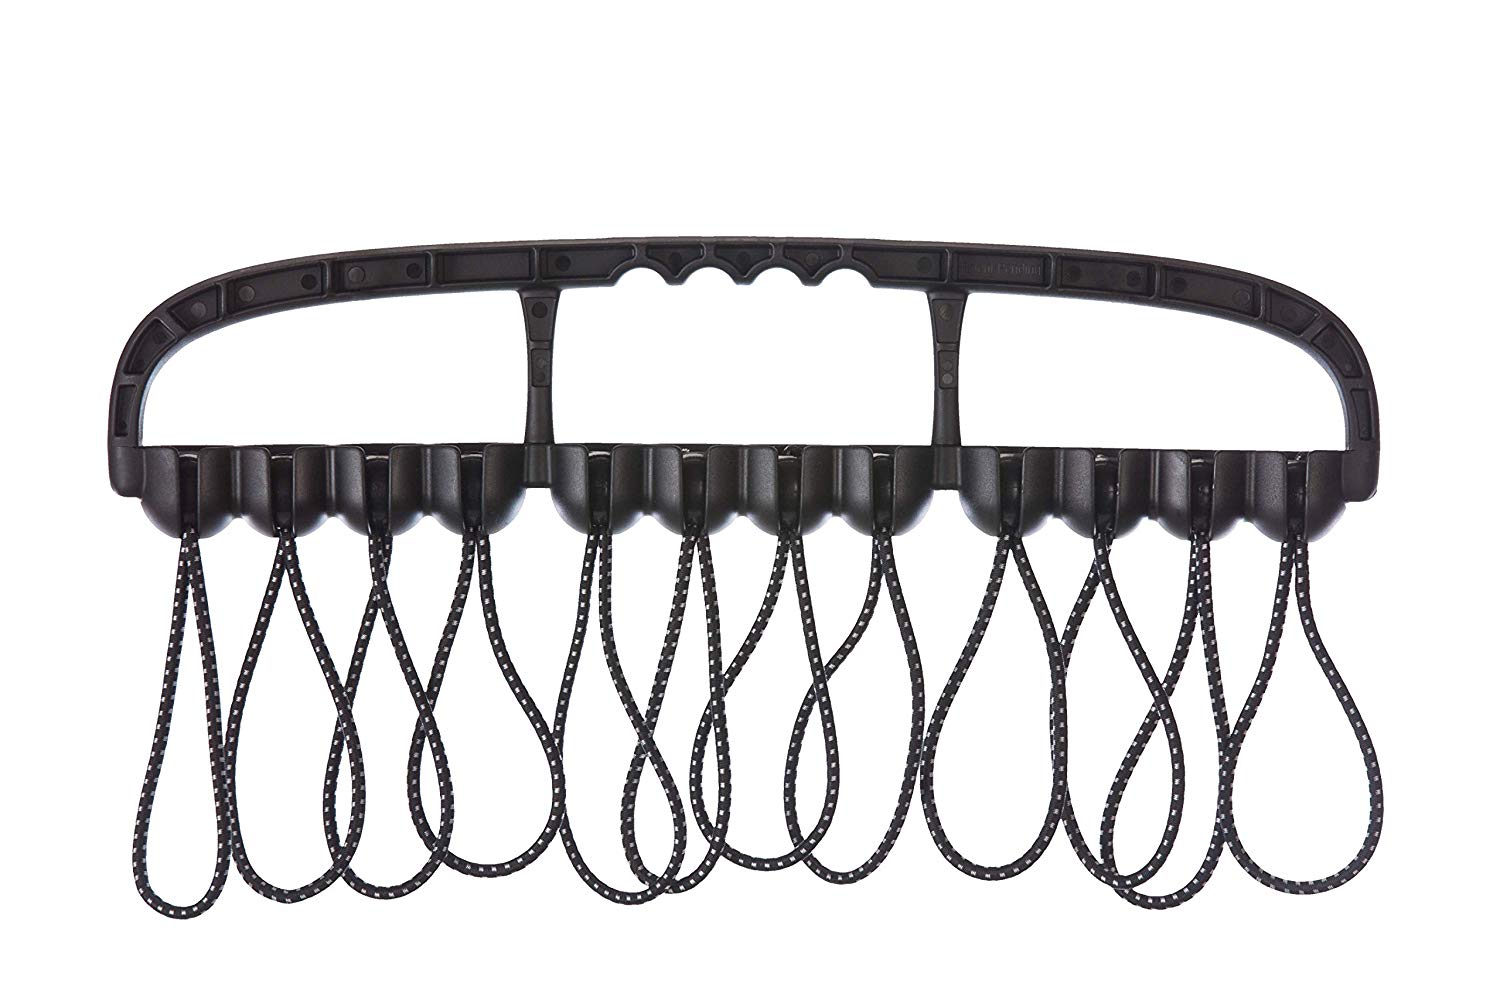 Cable Wrangler - 12 Heavy Duty Bungee Balls for Tools and Wire Management